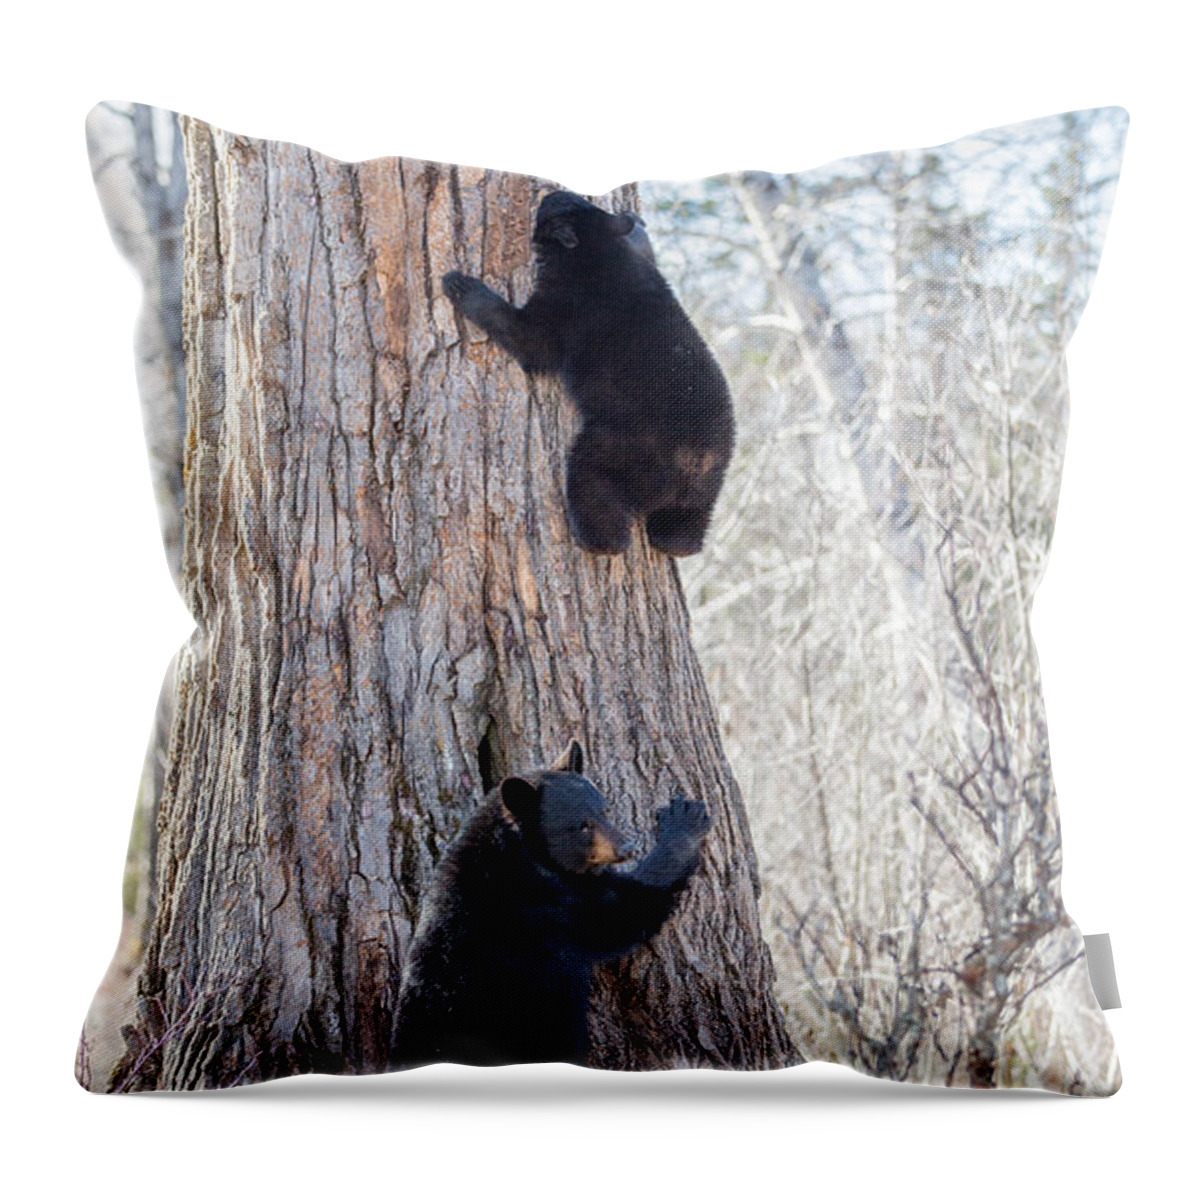 Sam Amato Photography Throw Pillow featuring the photograph Black Bear Sow and Cub by Sam Amato